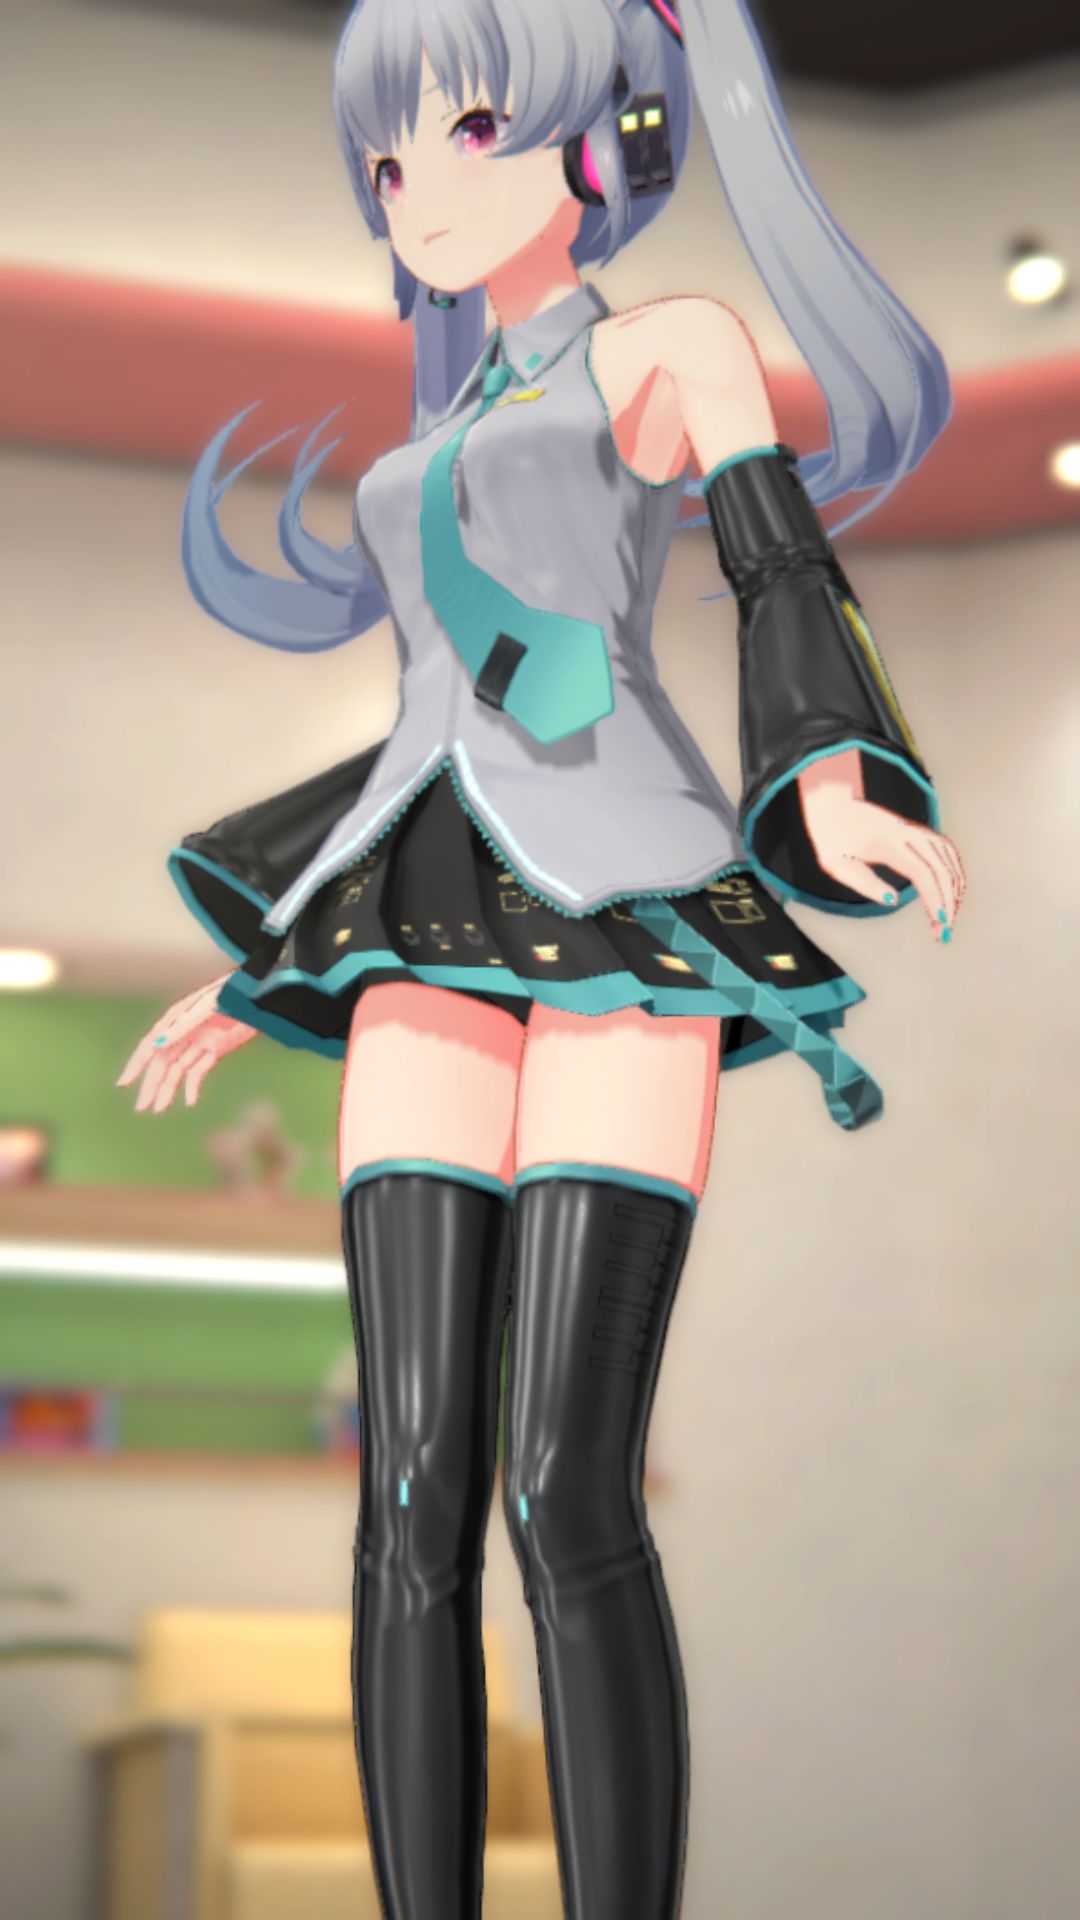 The result of peeking into the contents of the skirt of the smartphone game "IDOLY PRIDE" Hatsune Miku and Hatsune Miku costume 3